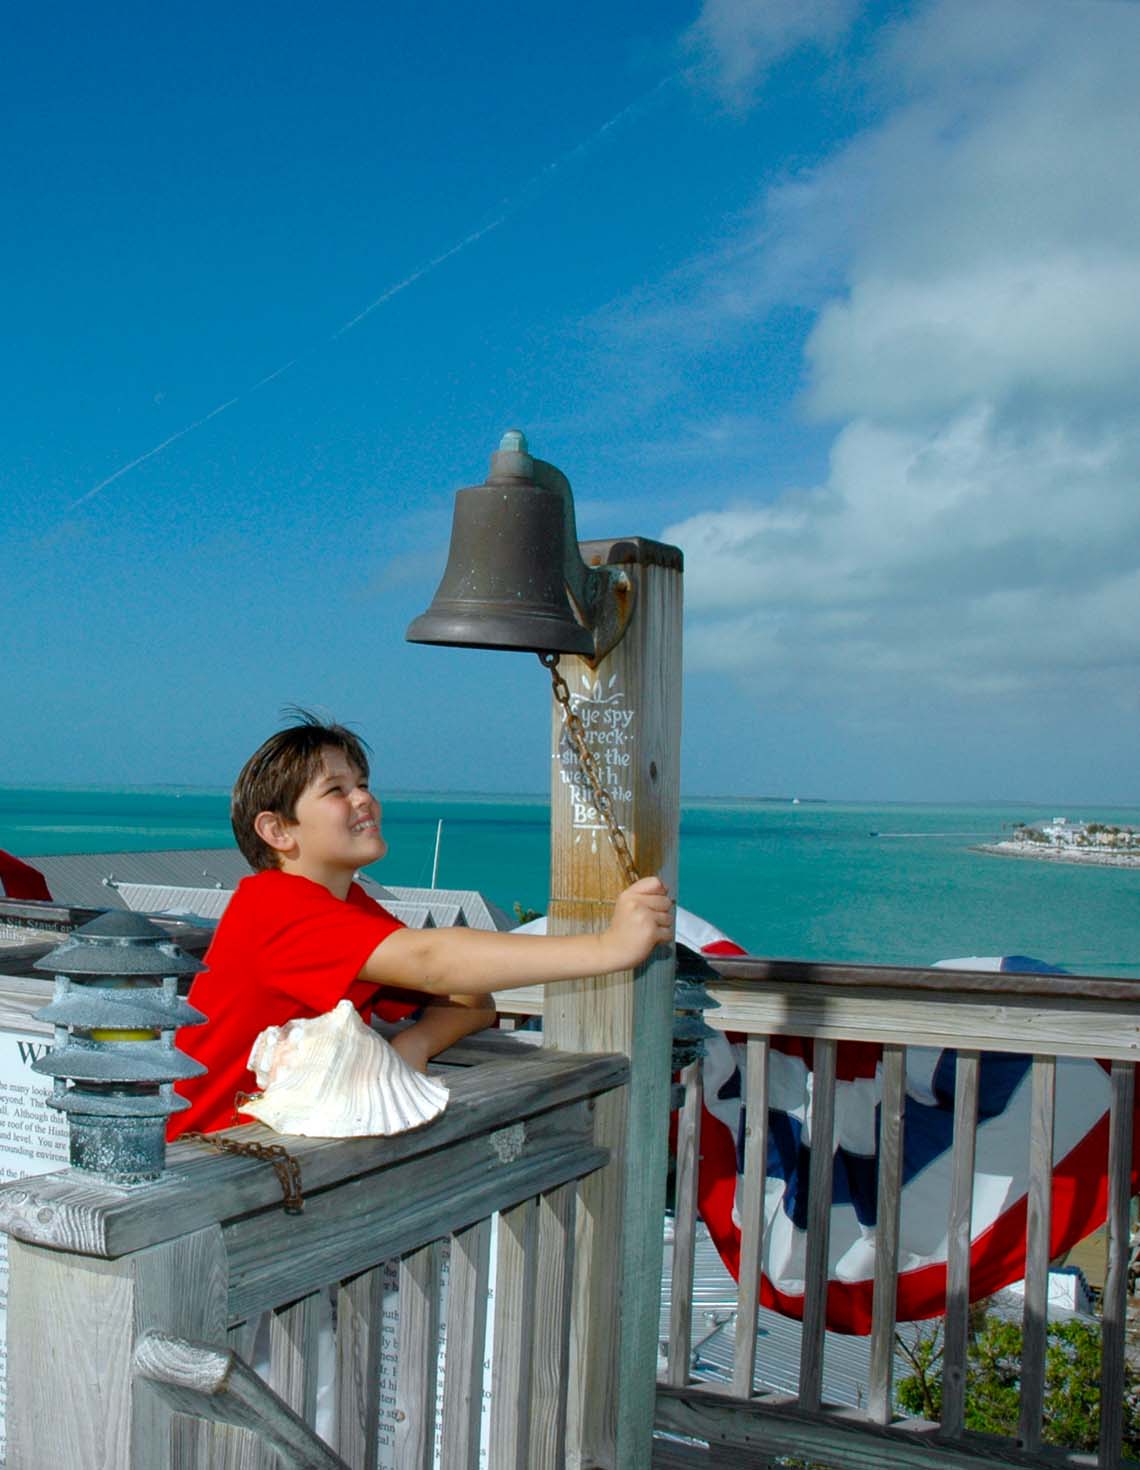 Key West Shipwreck Treasure Museum guest ringing bell at tower